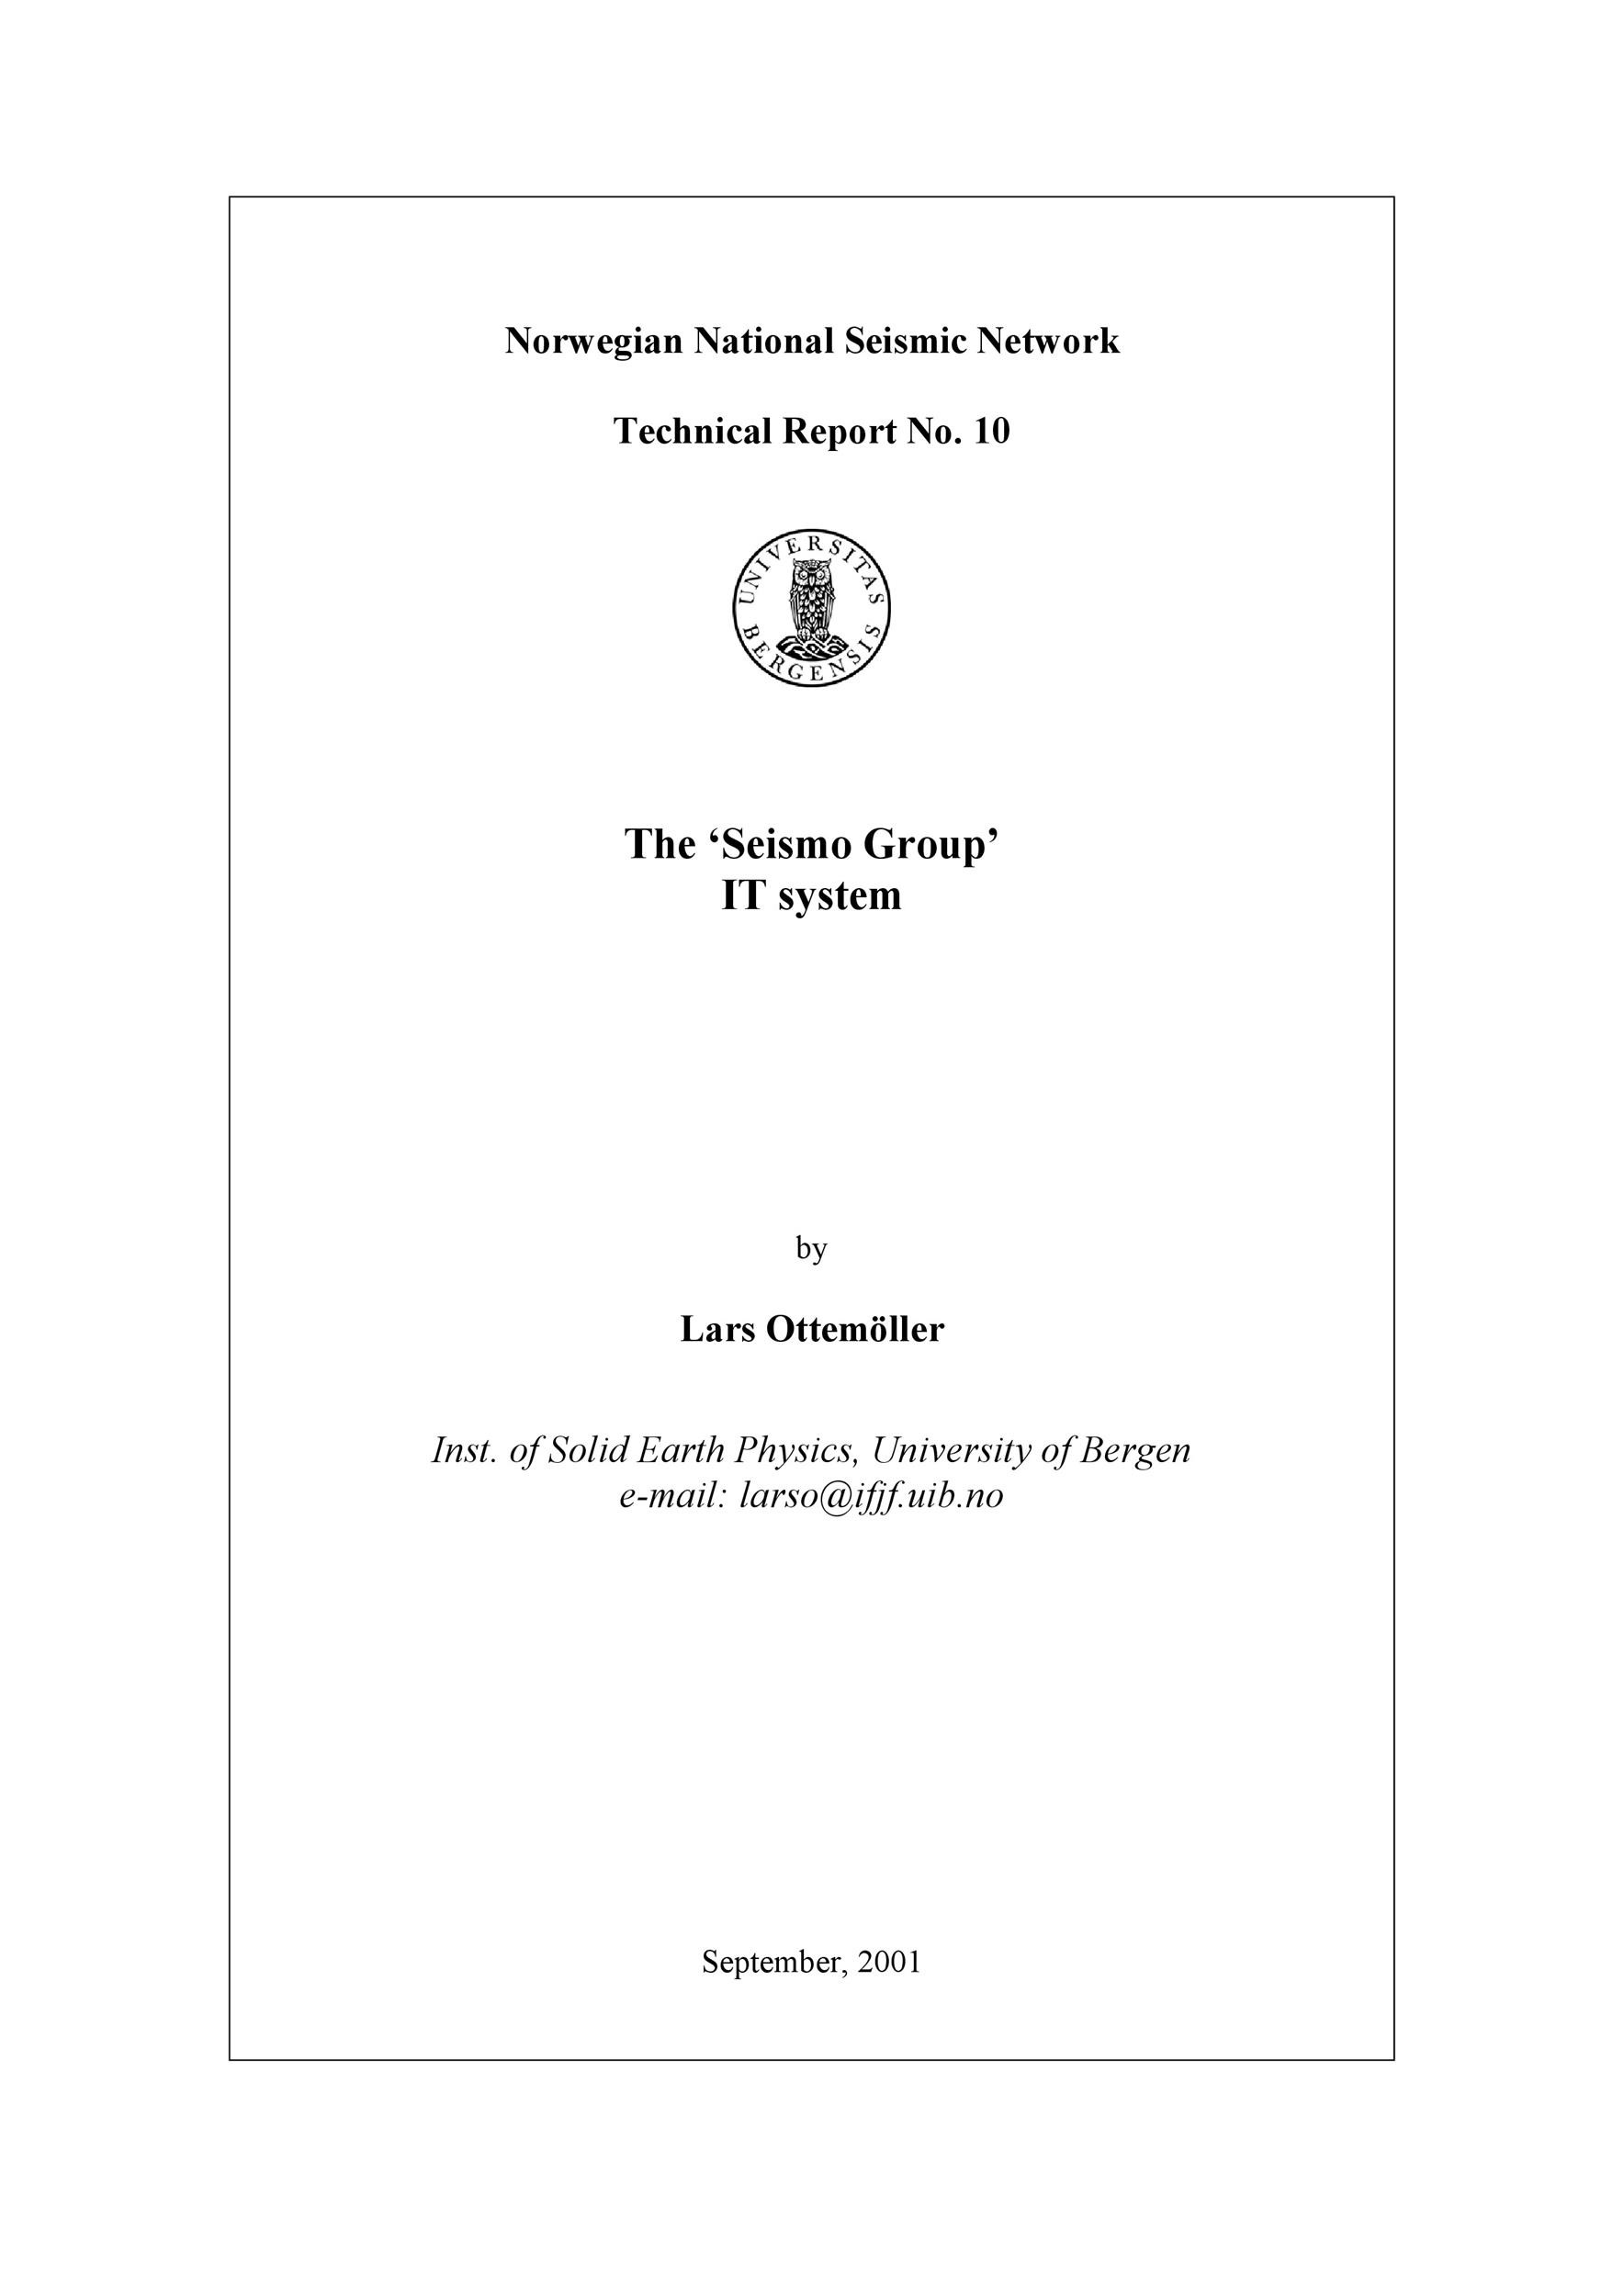 Free technical report template 26